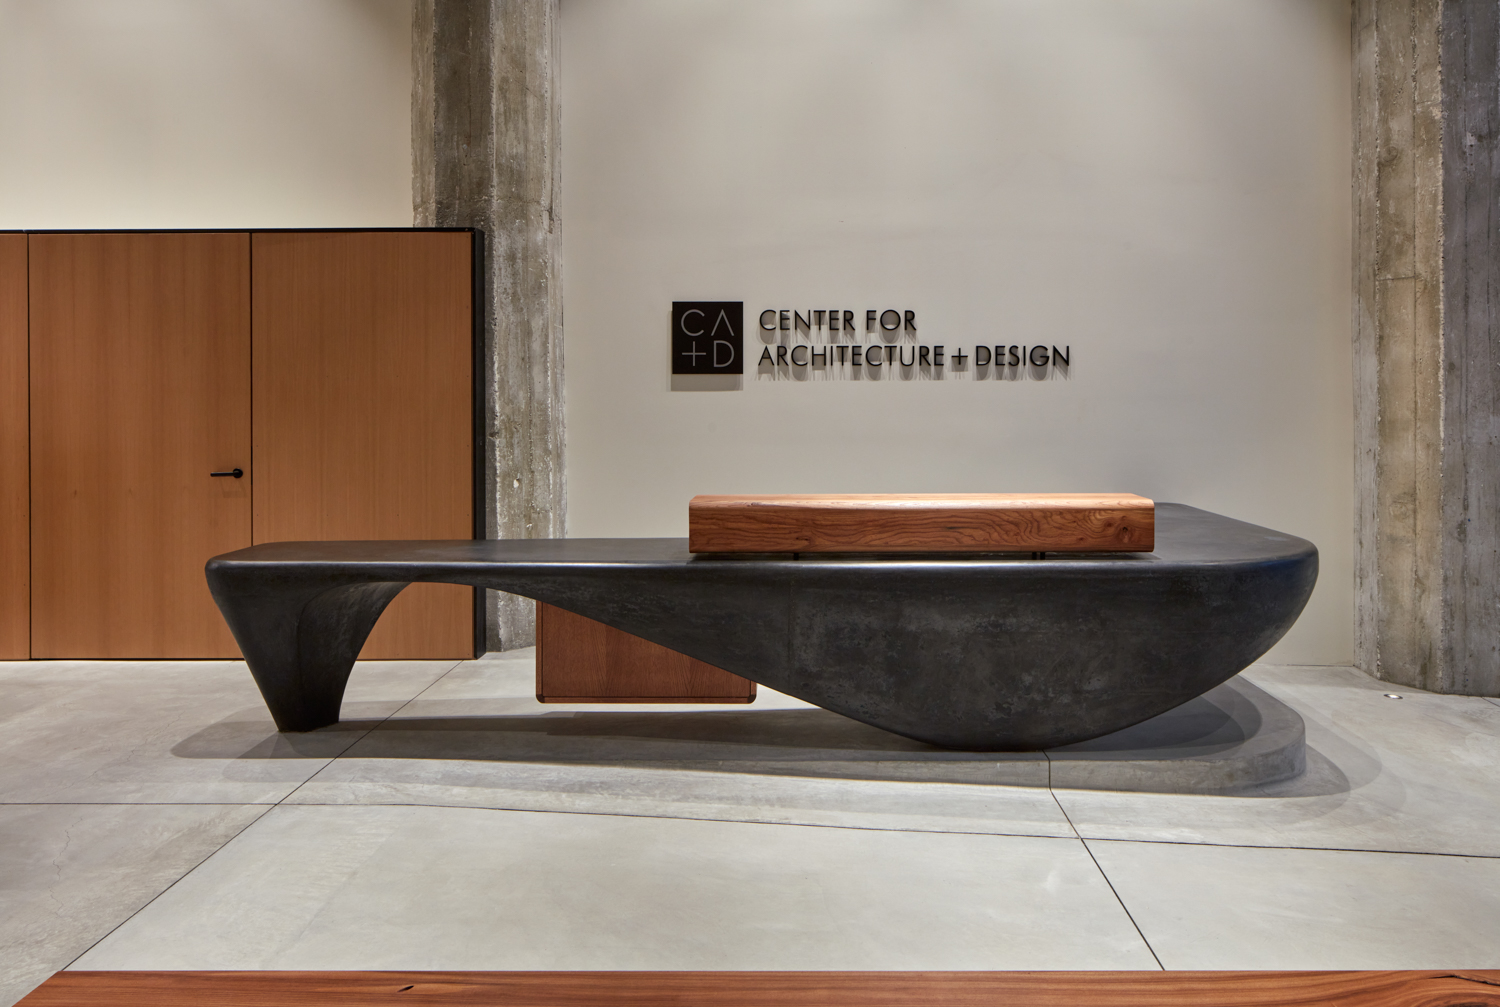 Center for Architecture and Design reception desk, image by Richard Barnes